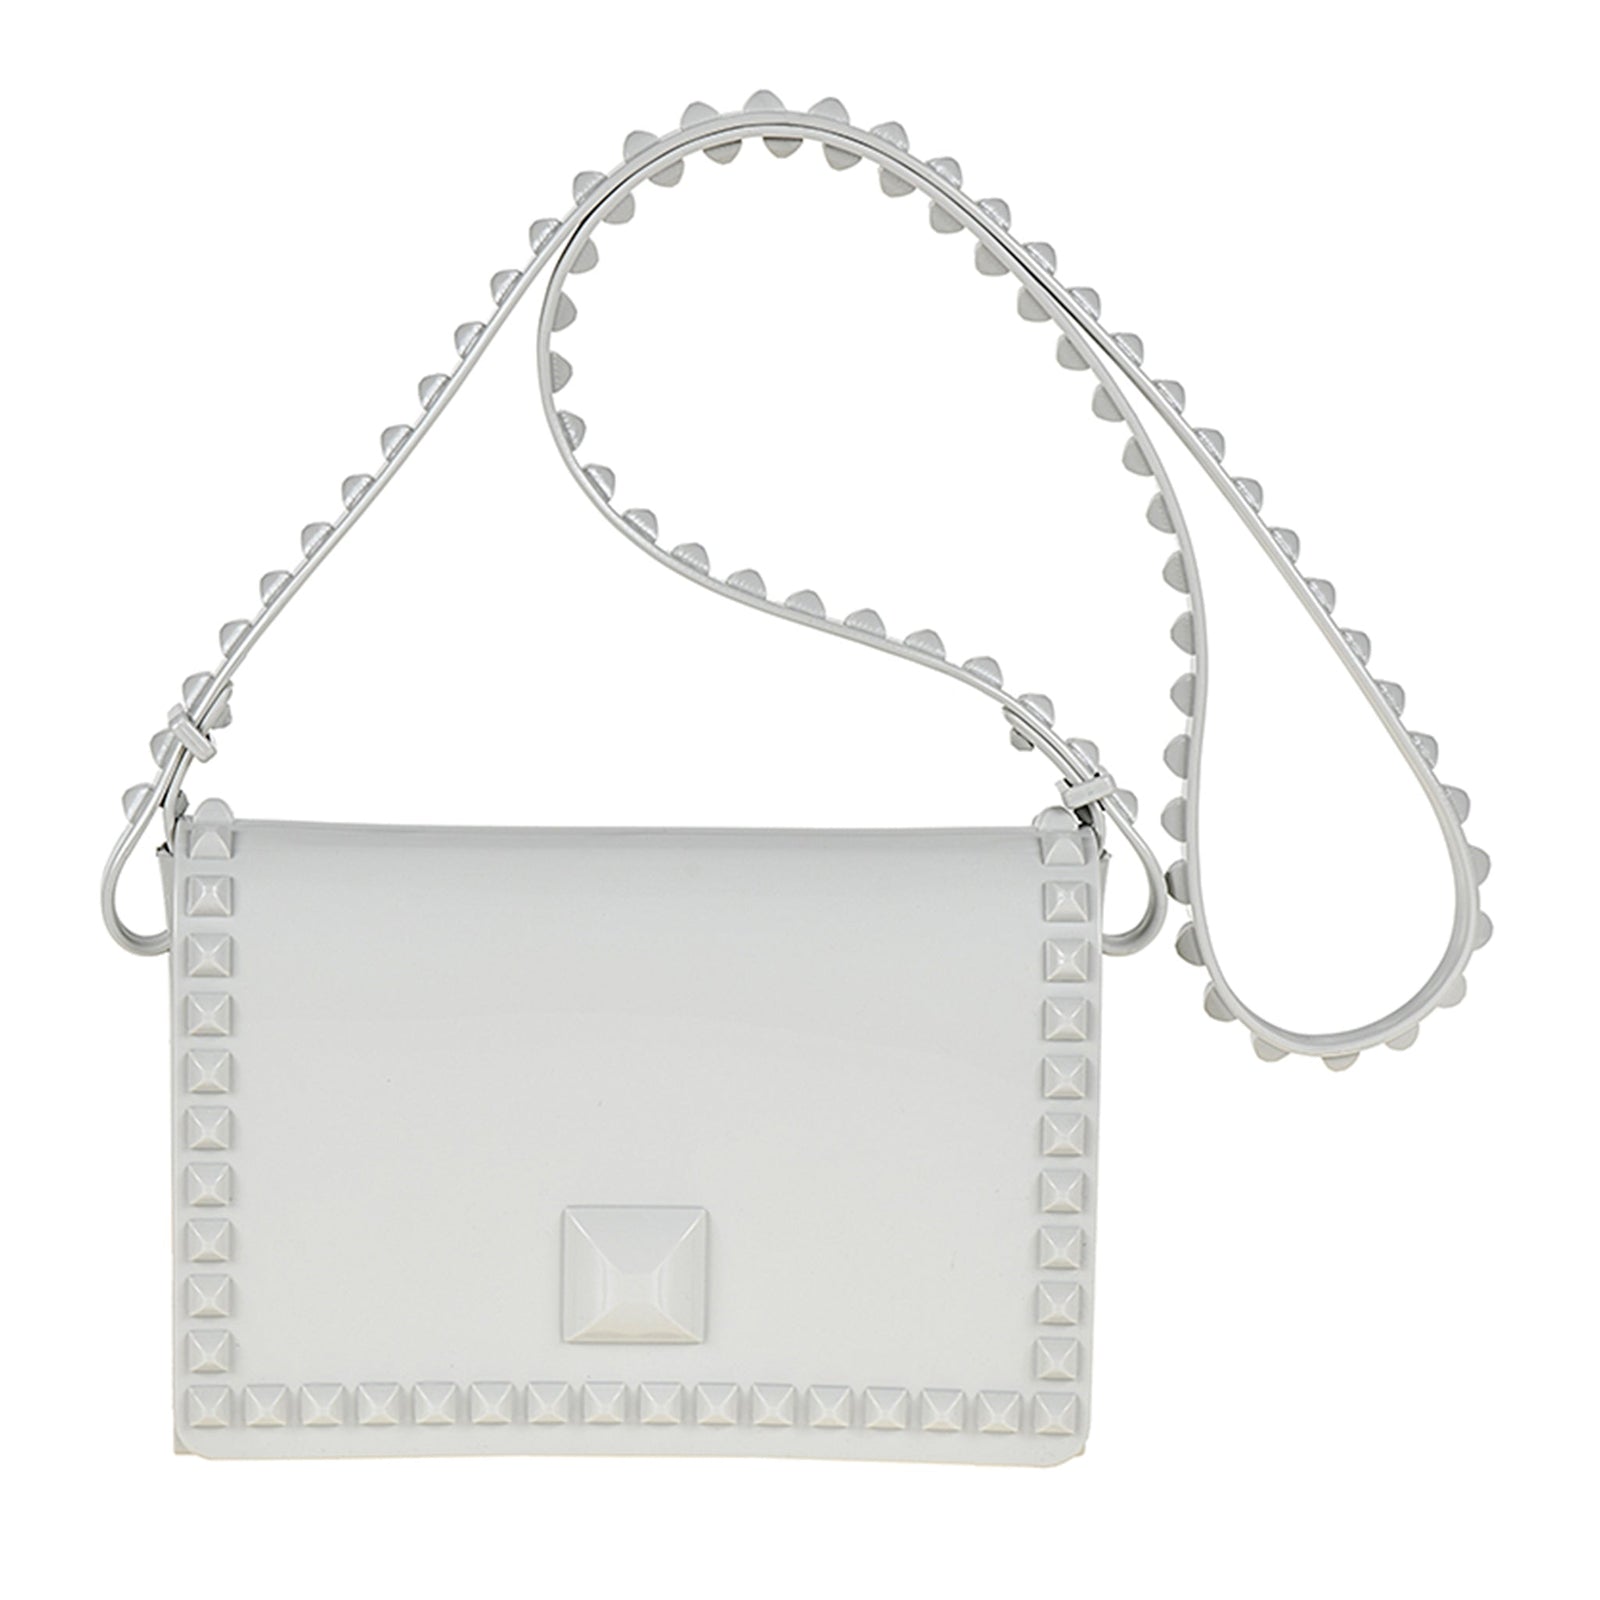 Sustainable white jelly purse perfect for the beach and beyond